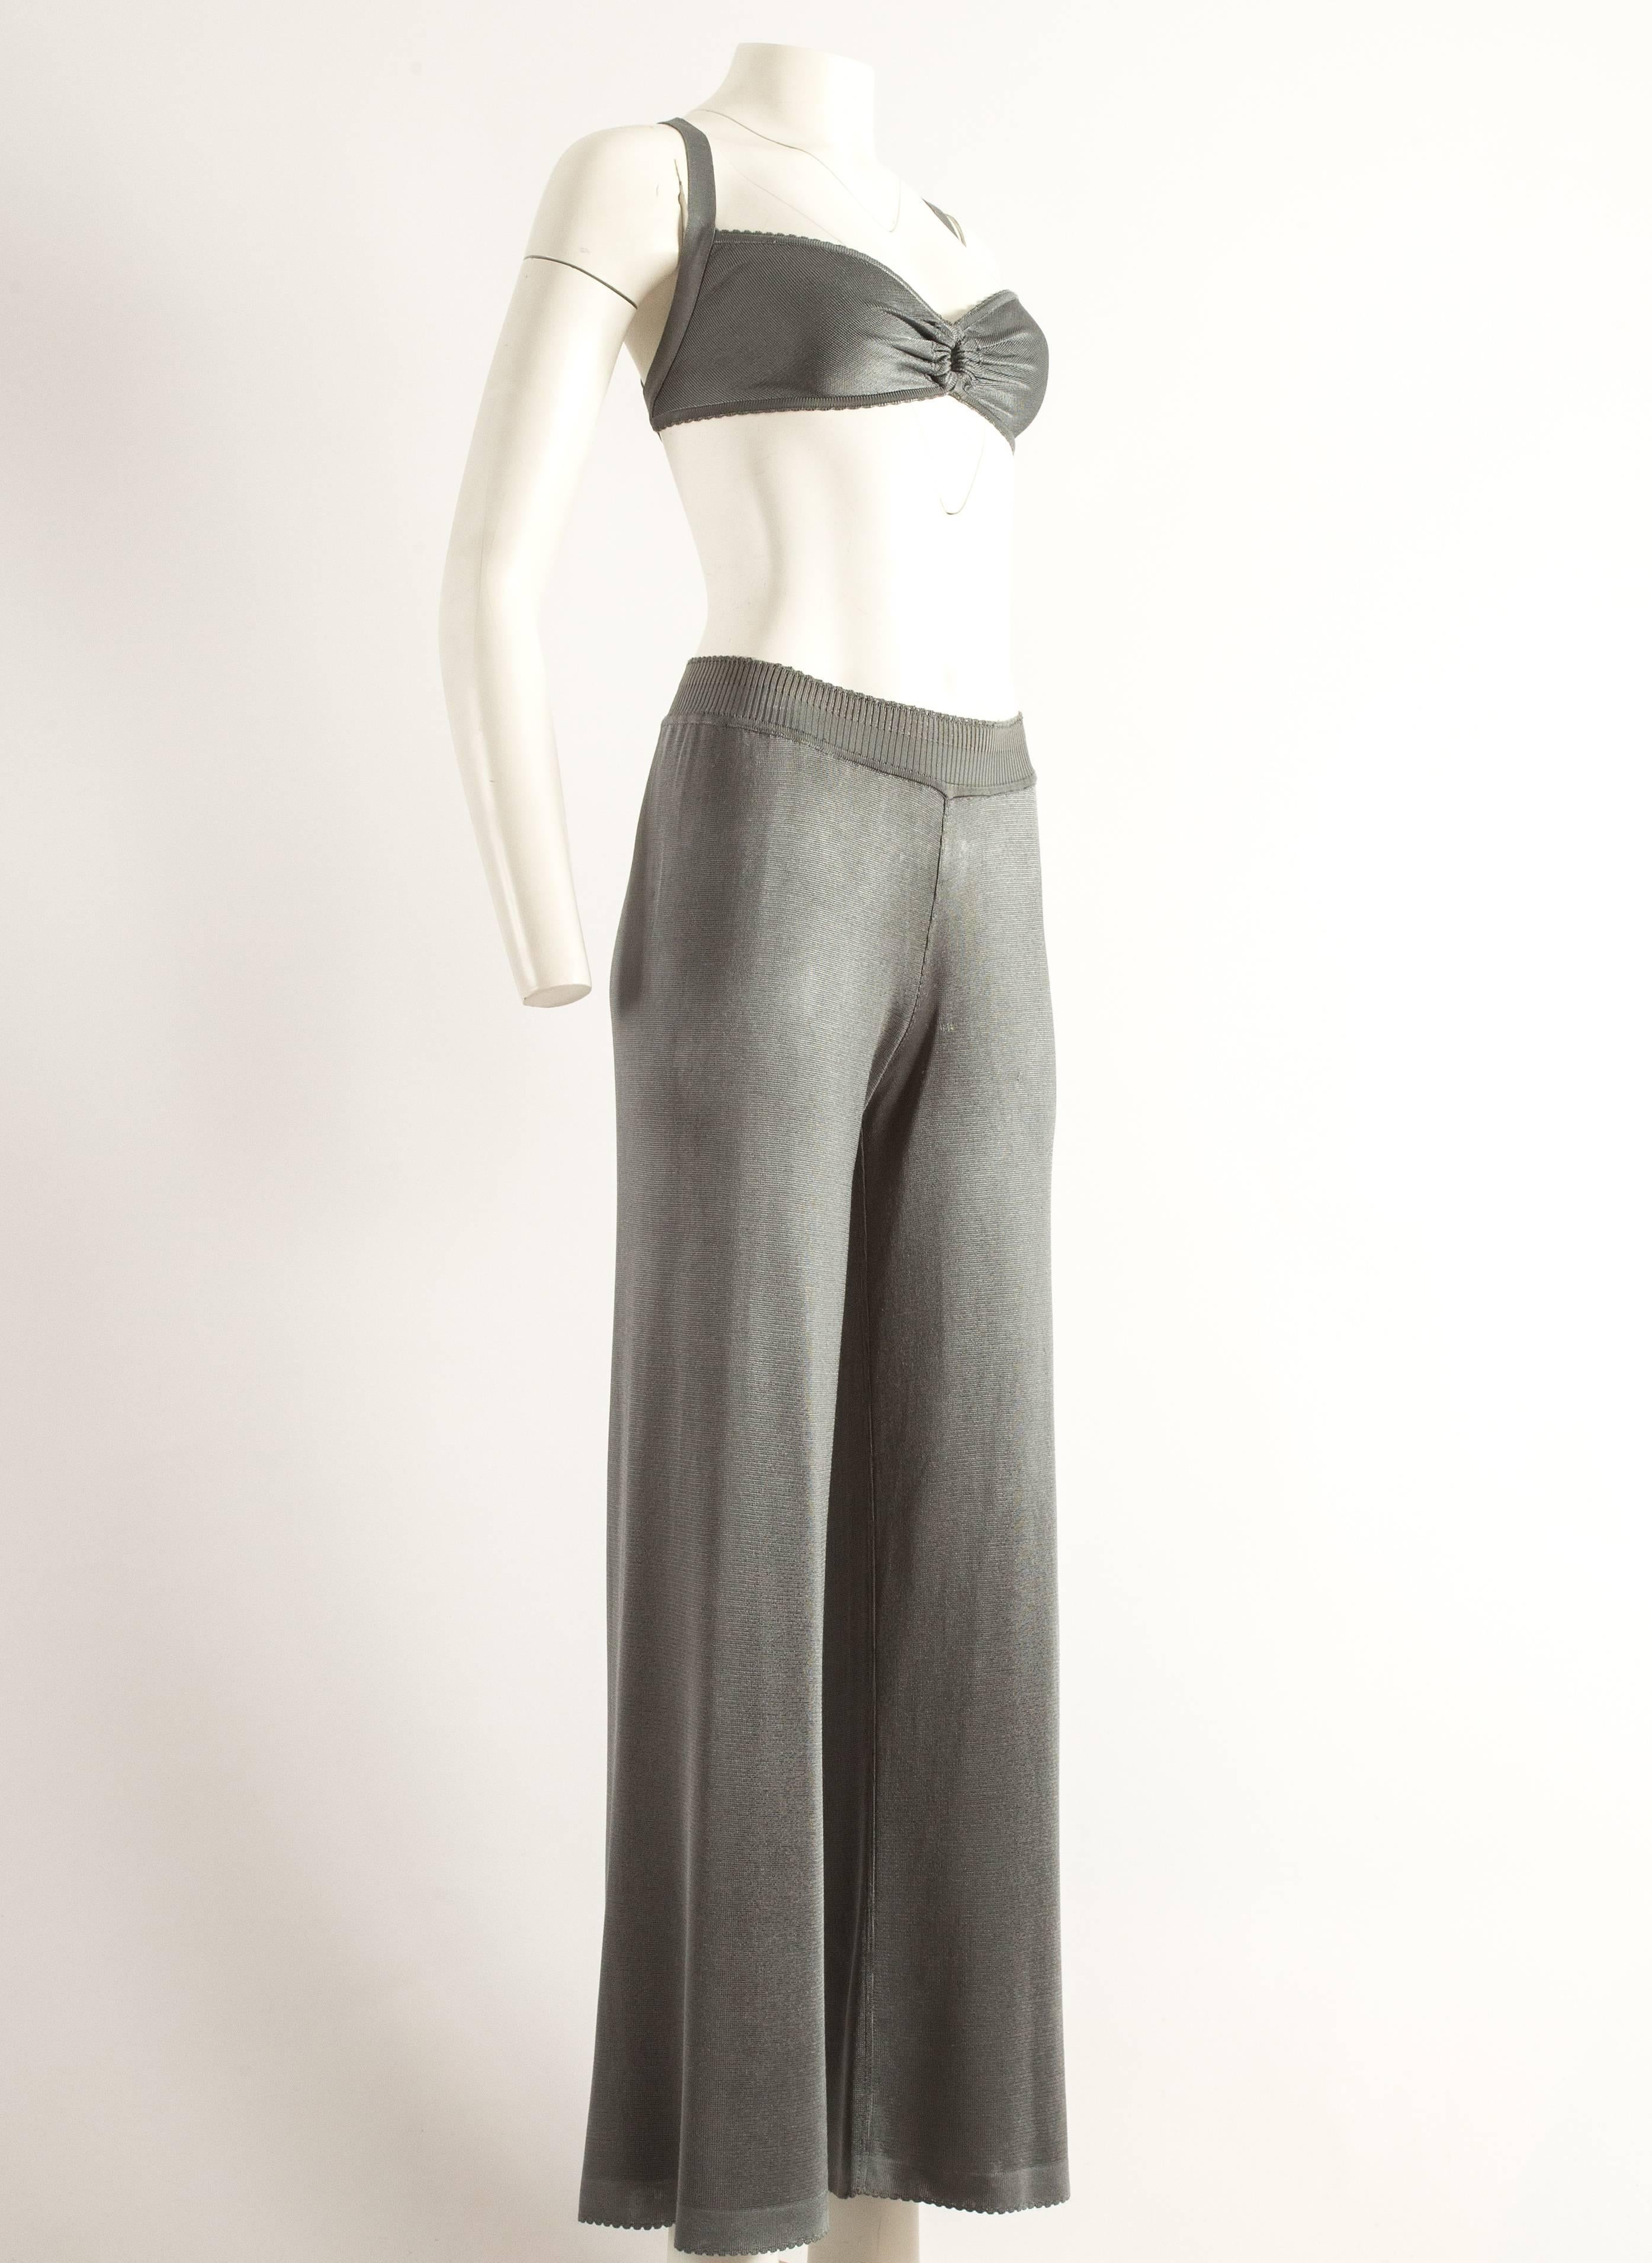 Women's Azzedine Alaia Spring-Summer 1993 grey acetate knitted bra and pants ensemble 